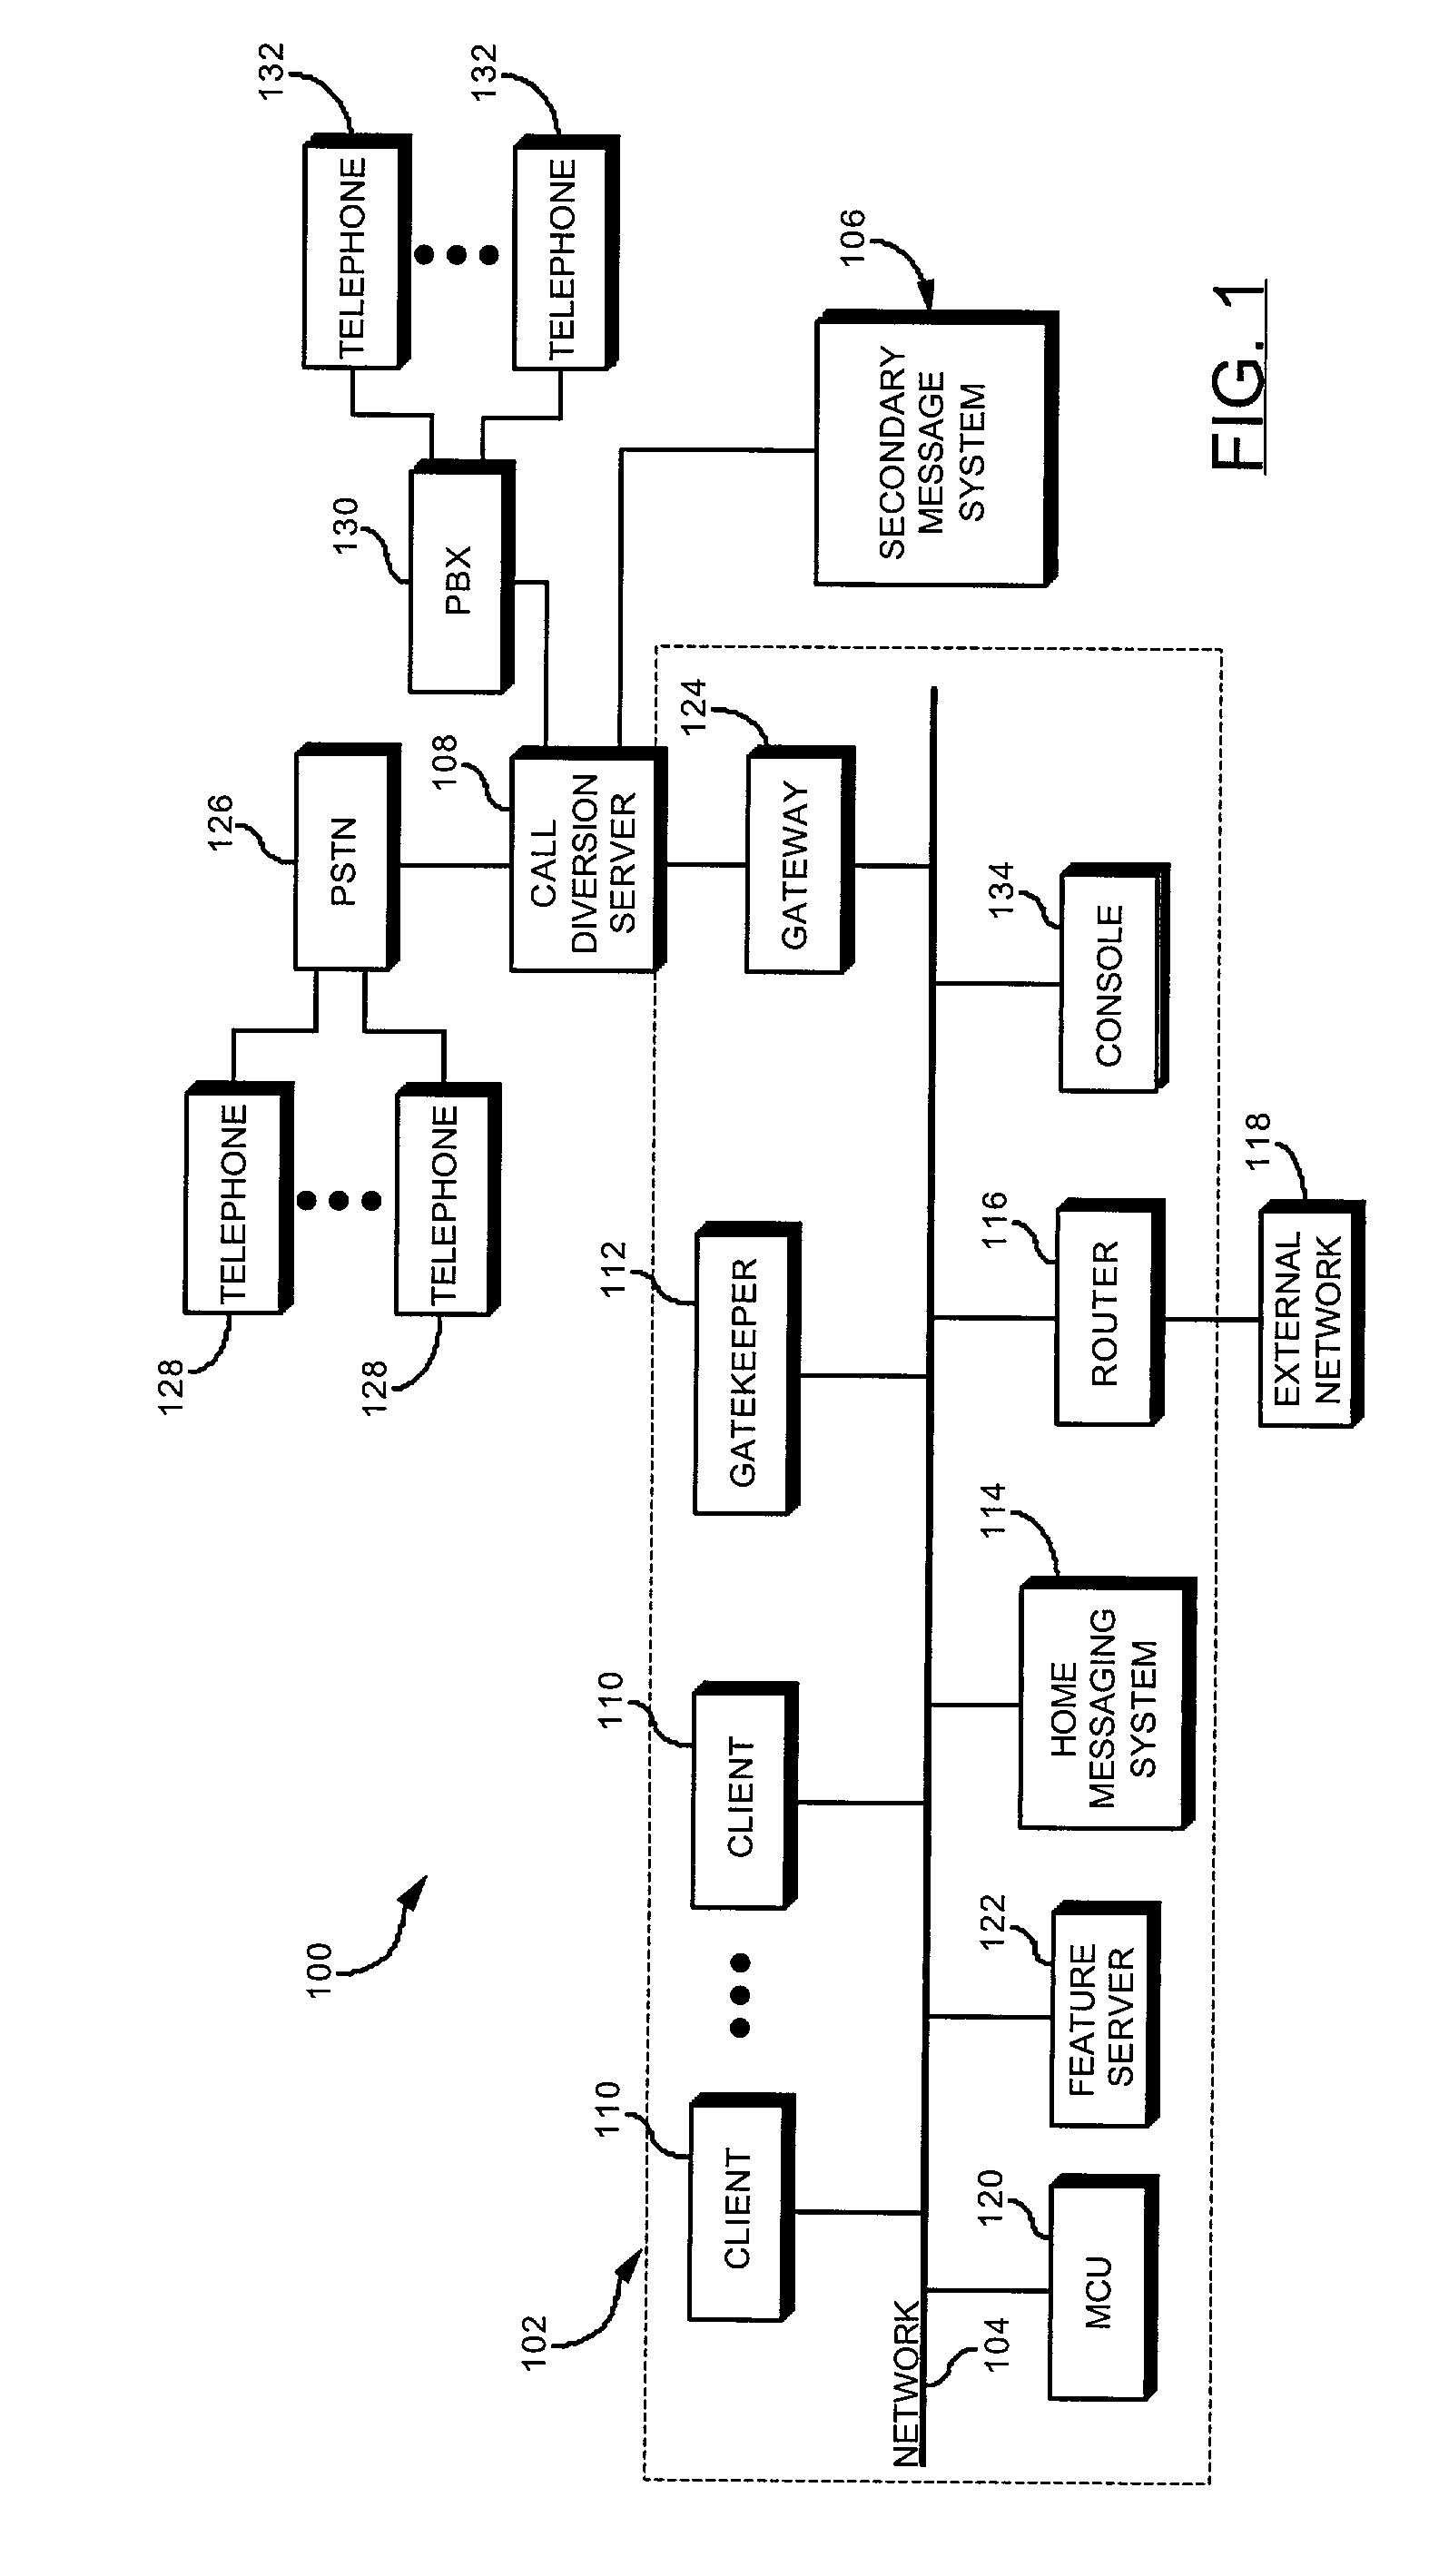 Apparatus and method for providing a secondary messaging system for a ToL communication system